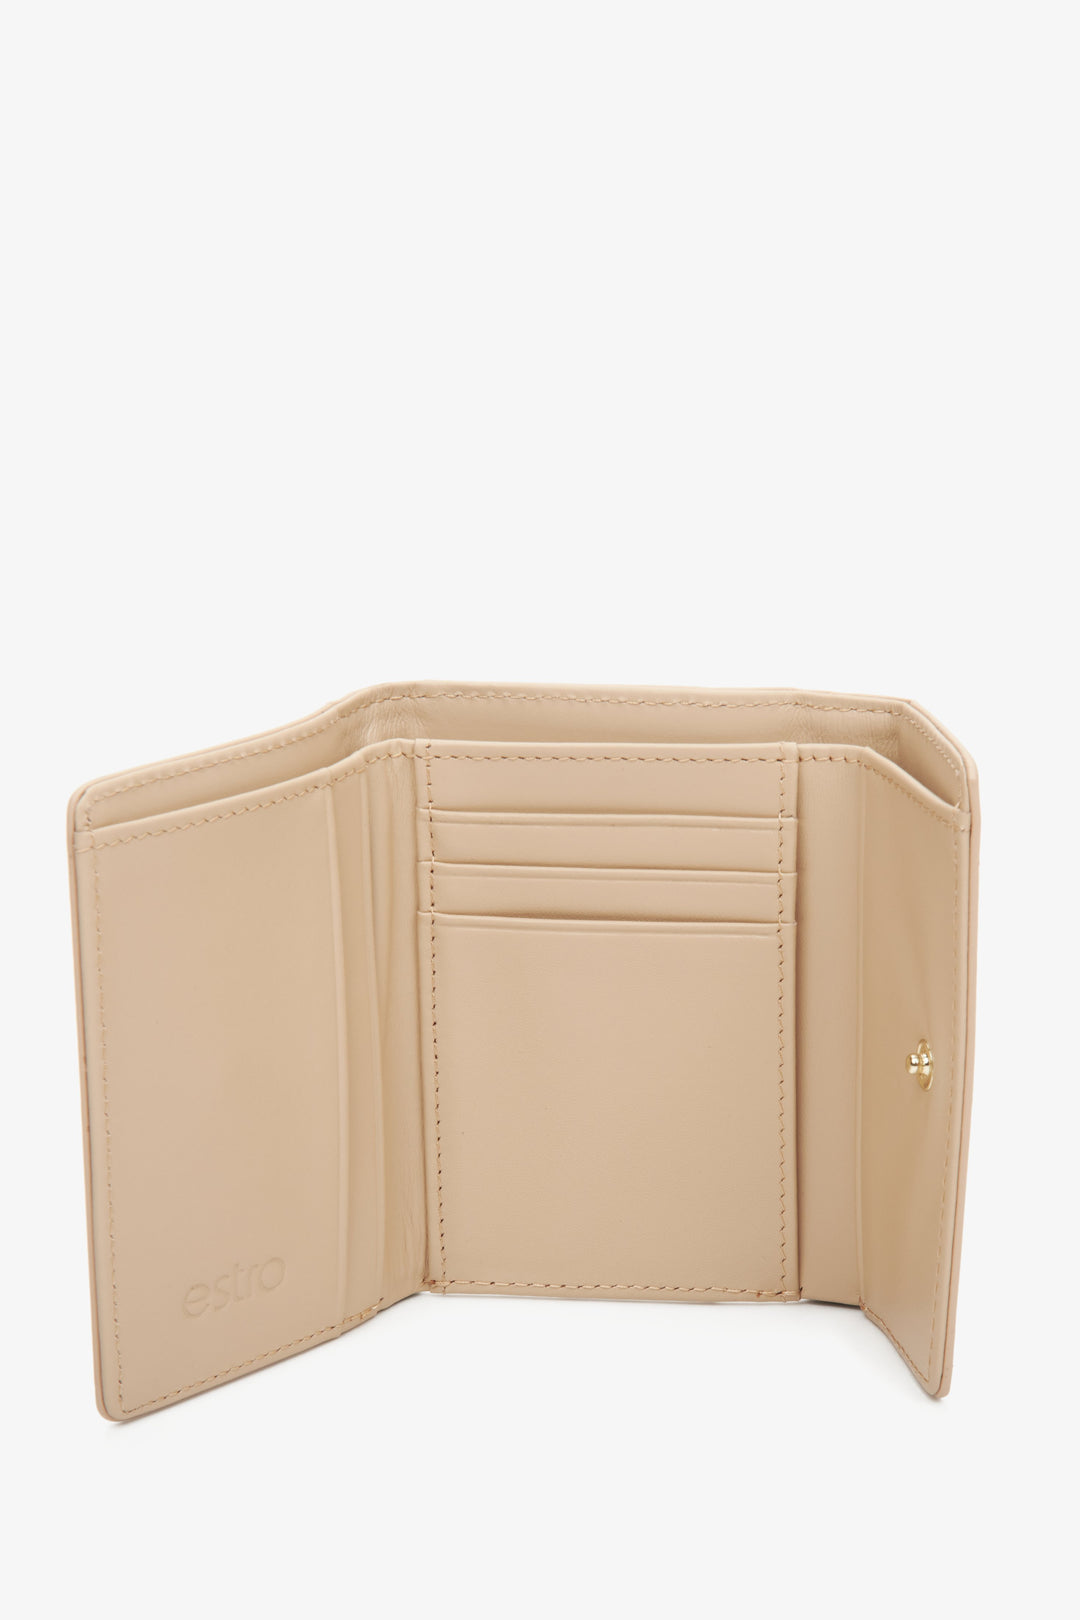 Women's tri-fold wallet made of genuine leather in beige colour - interior view of the model.